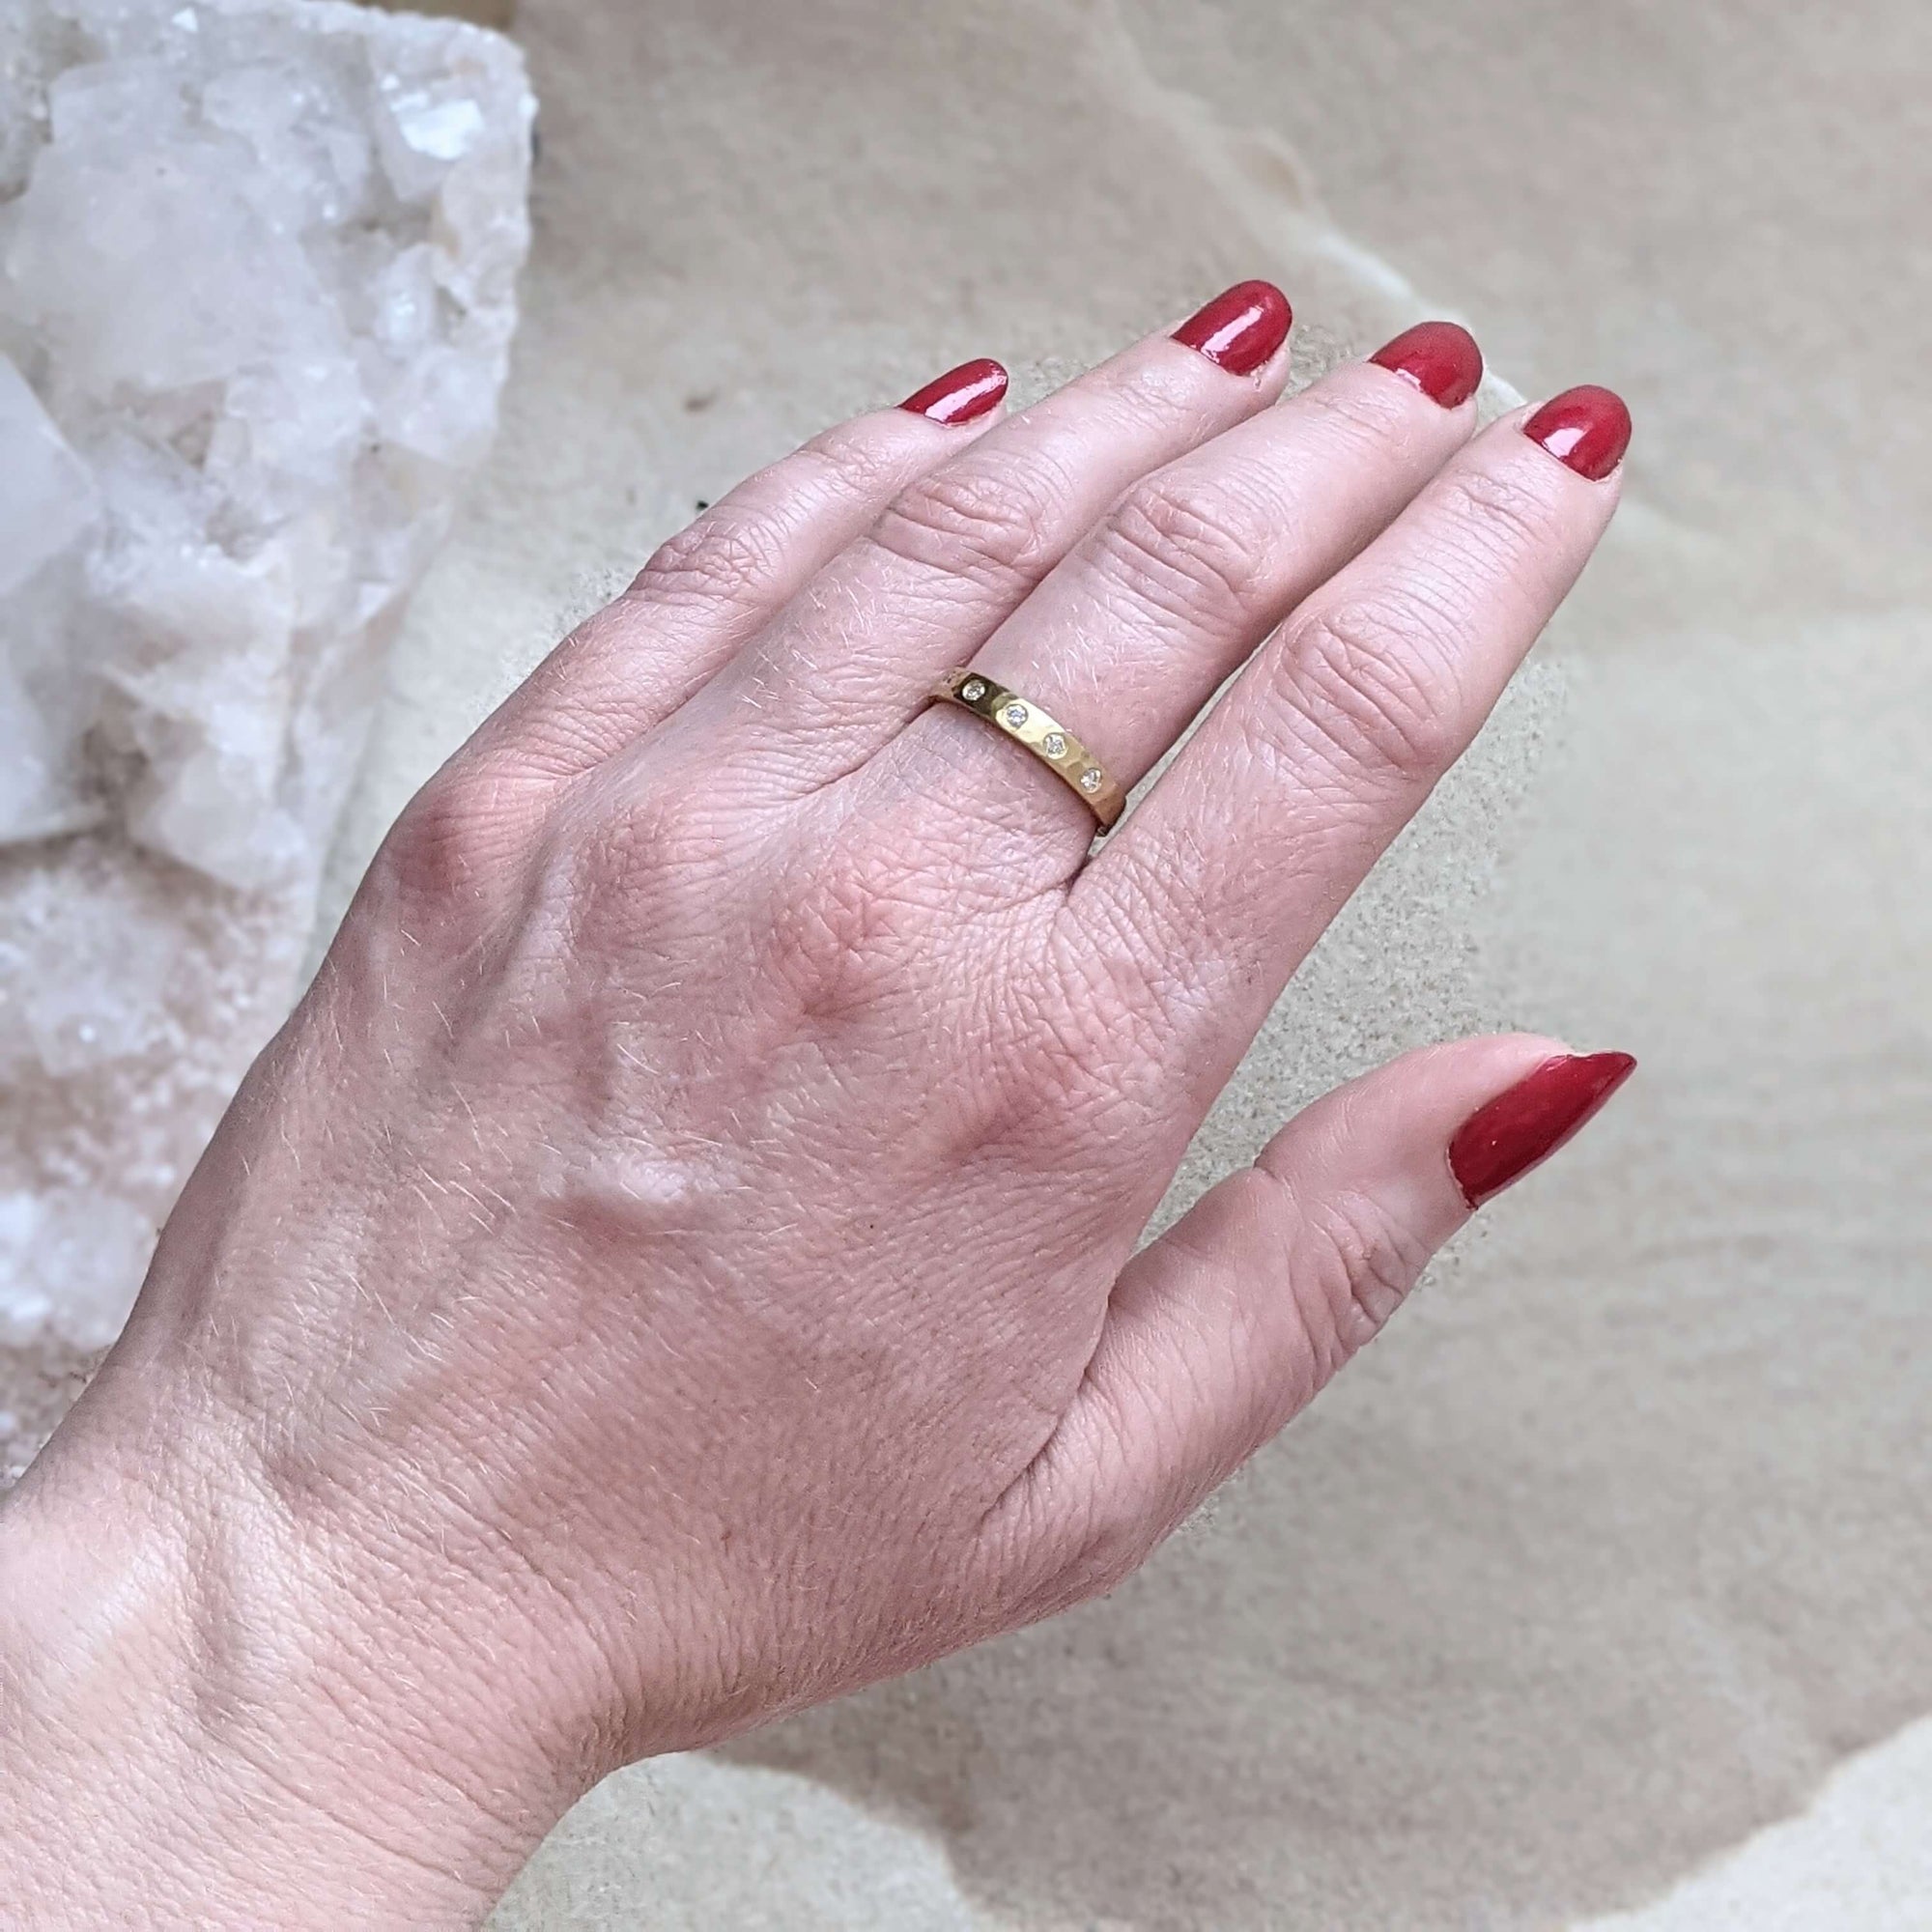 Handmade hammered 18k yellow gold eternity band with Canadian mined white diamonds. Made by EC Design Studio in Minneapolis, MN using recycled metal and conflict-free stones.